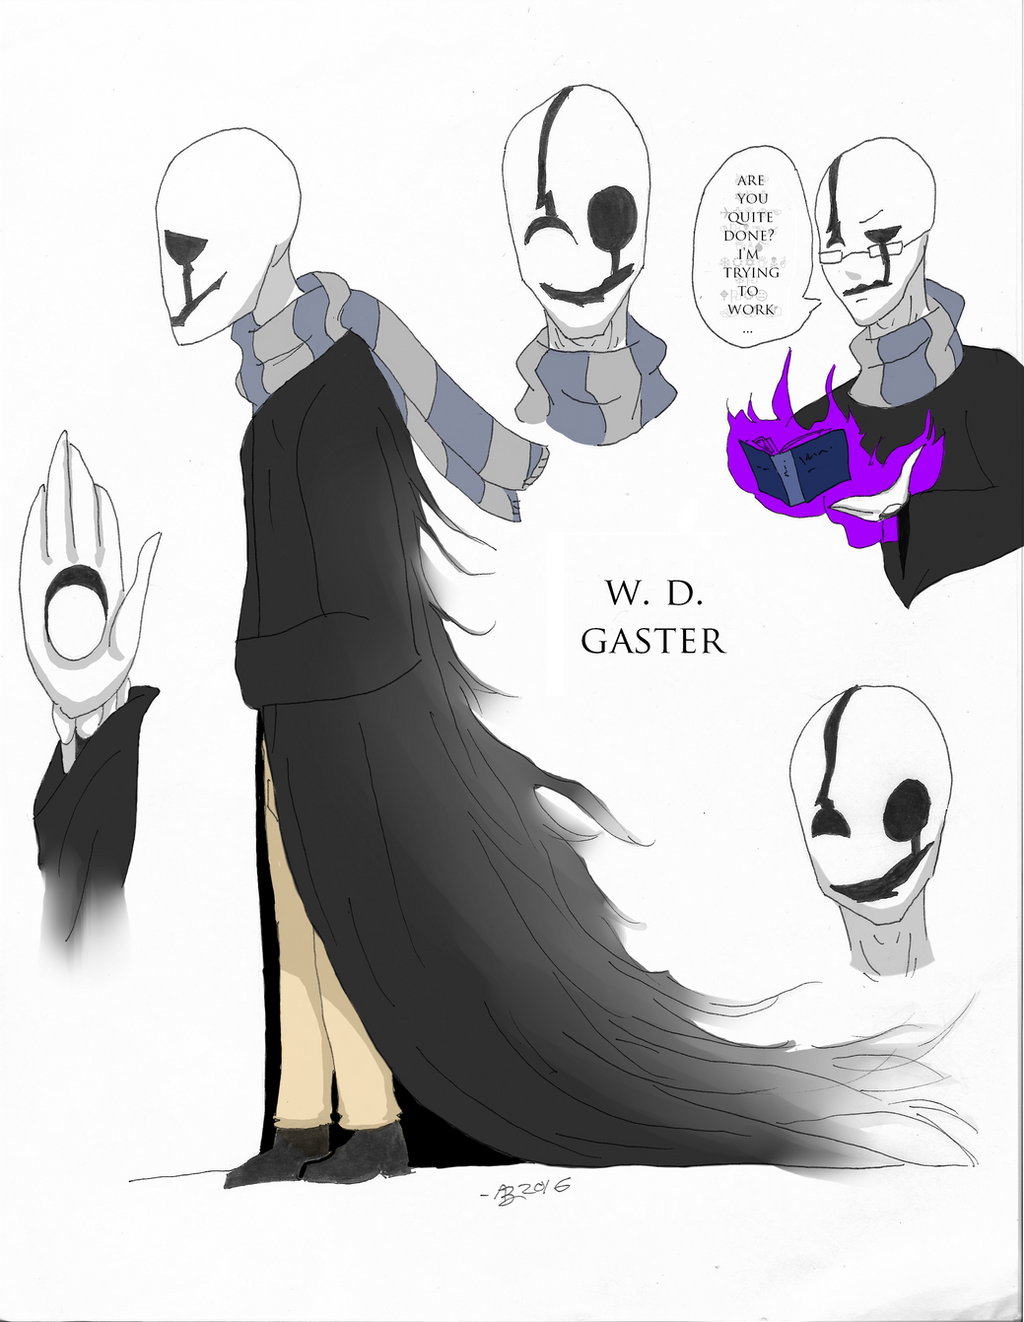 W. D. Gaster [Comic Reference] 2016 by AzuelZorro102 on DeviantArt